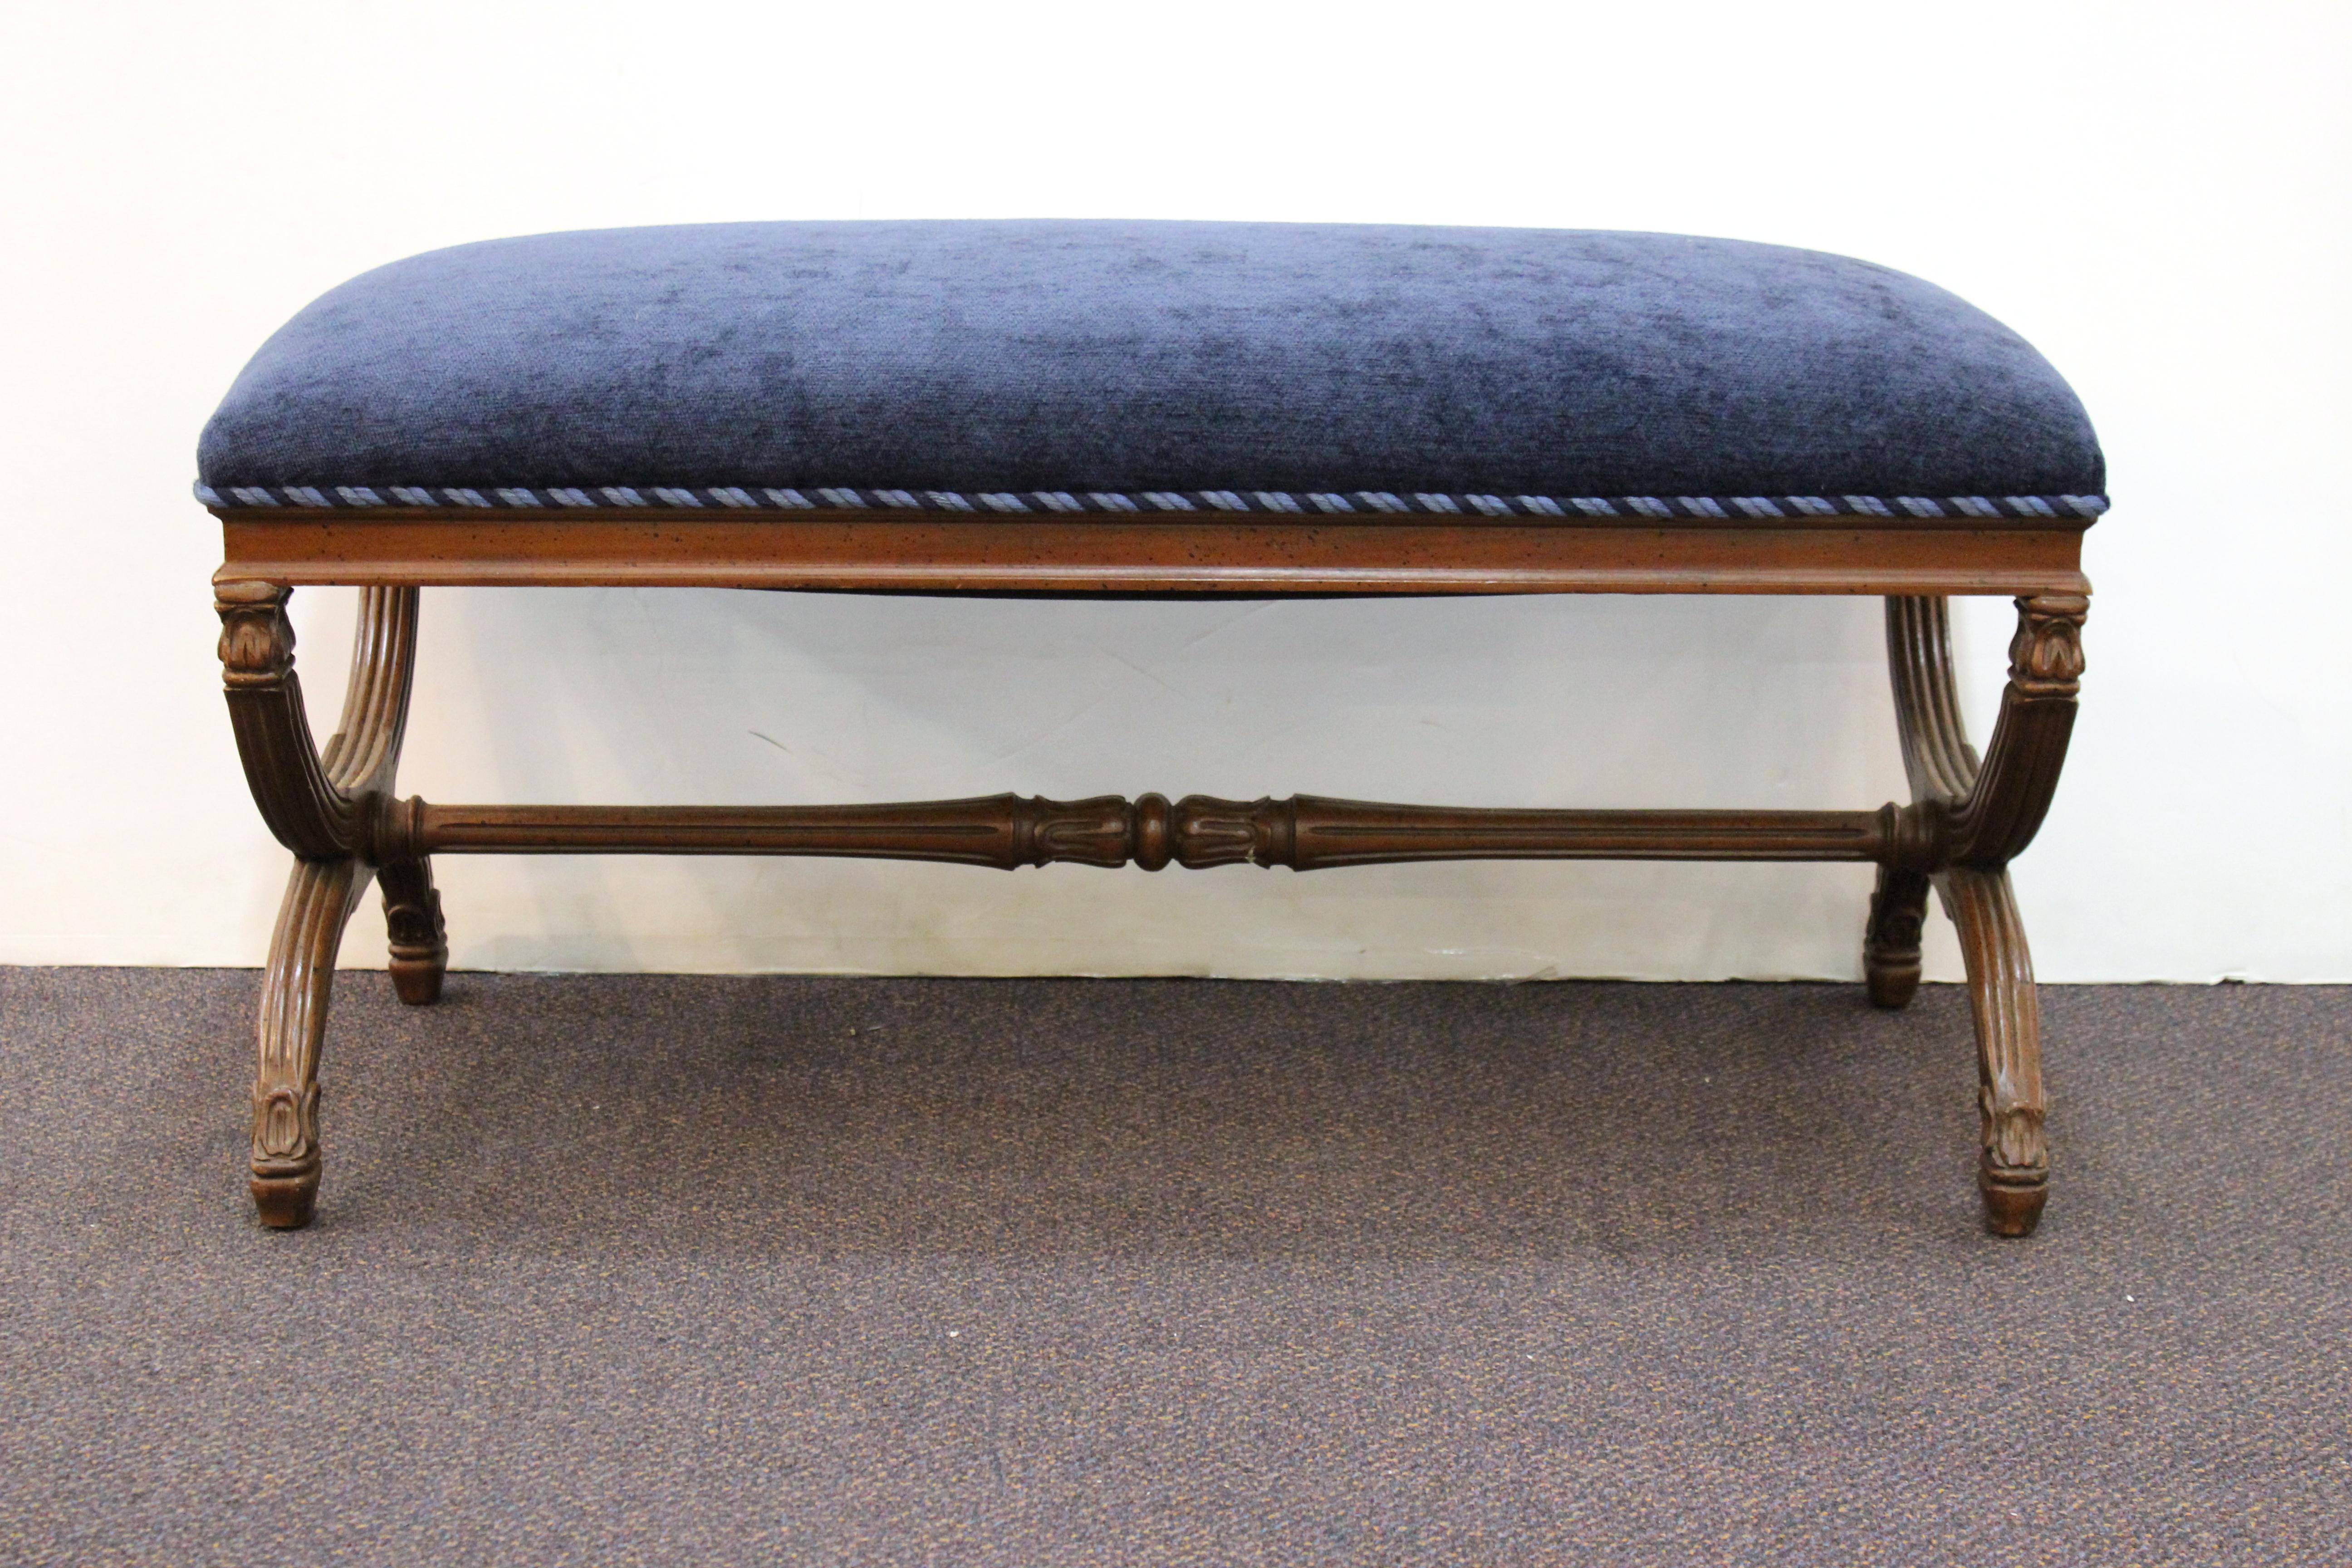 Neoclassical style bench produced in the United States during the 1970s. The bench is recently reupholstered in navy chenille with braided trim. The curved carved base is crafted from walnut. Despite some wear appropriate to age and use the bench